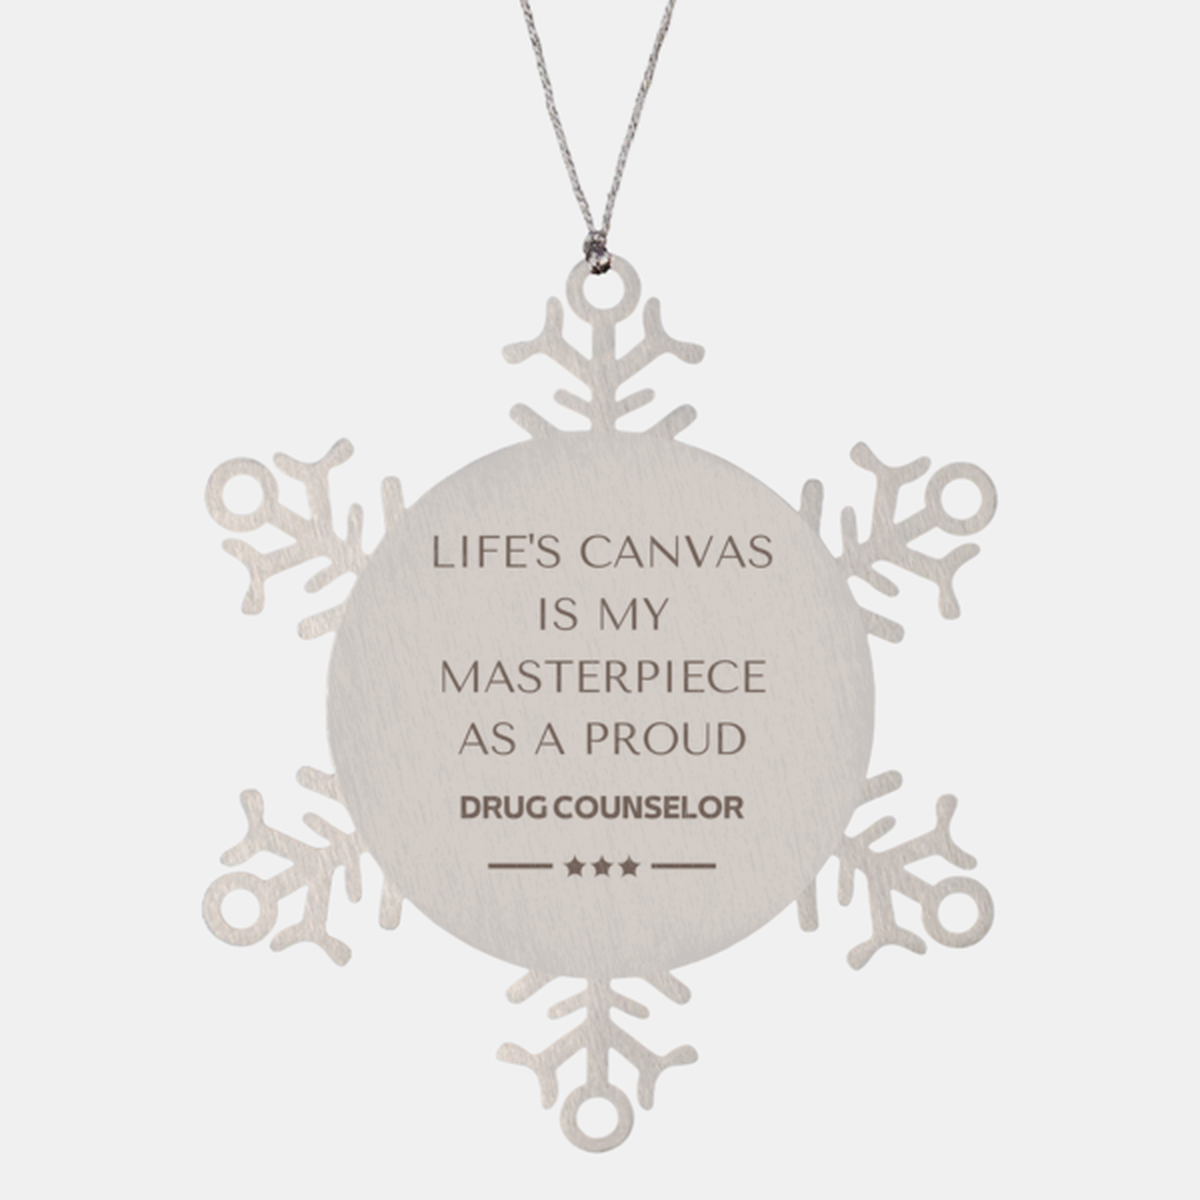 Proud Drug Counselor Gifts, Life's canvas is my masterpiece, Epic Birthday Christmas Unique Snowflake Ornament For Drug Counselor, Coworkers, Men, Women, Friends